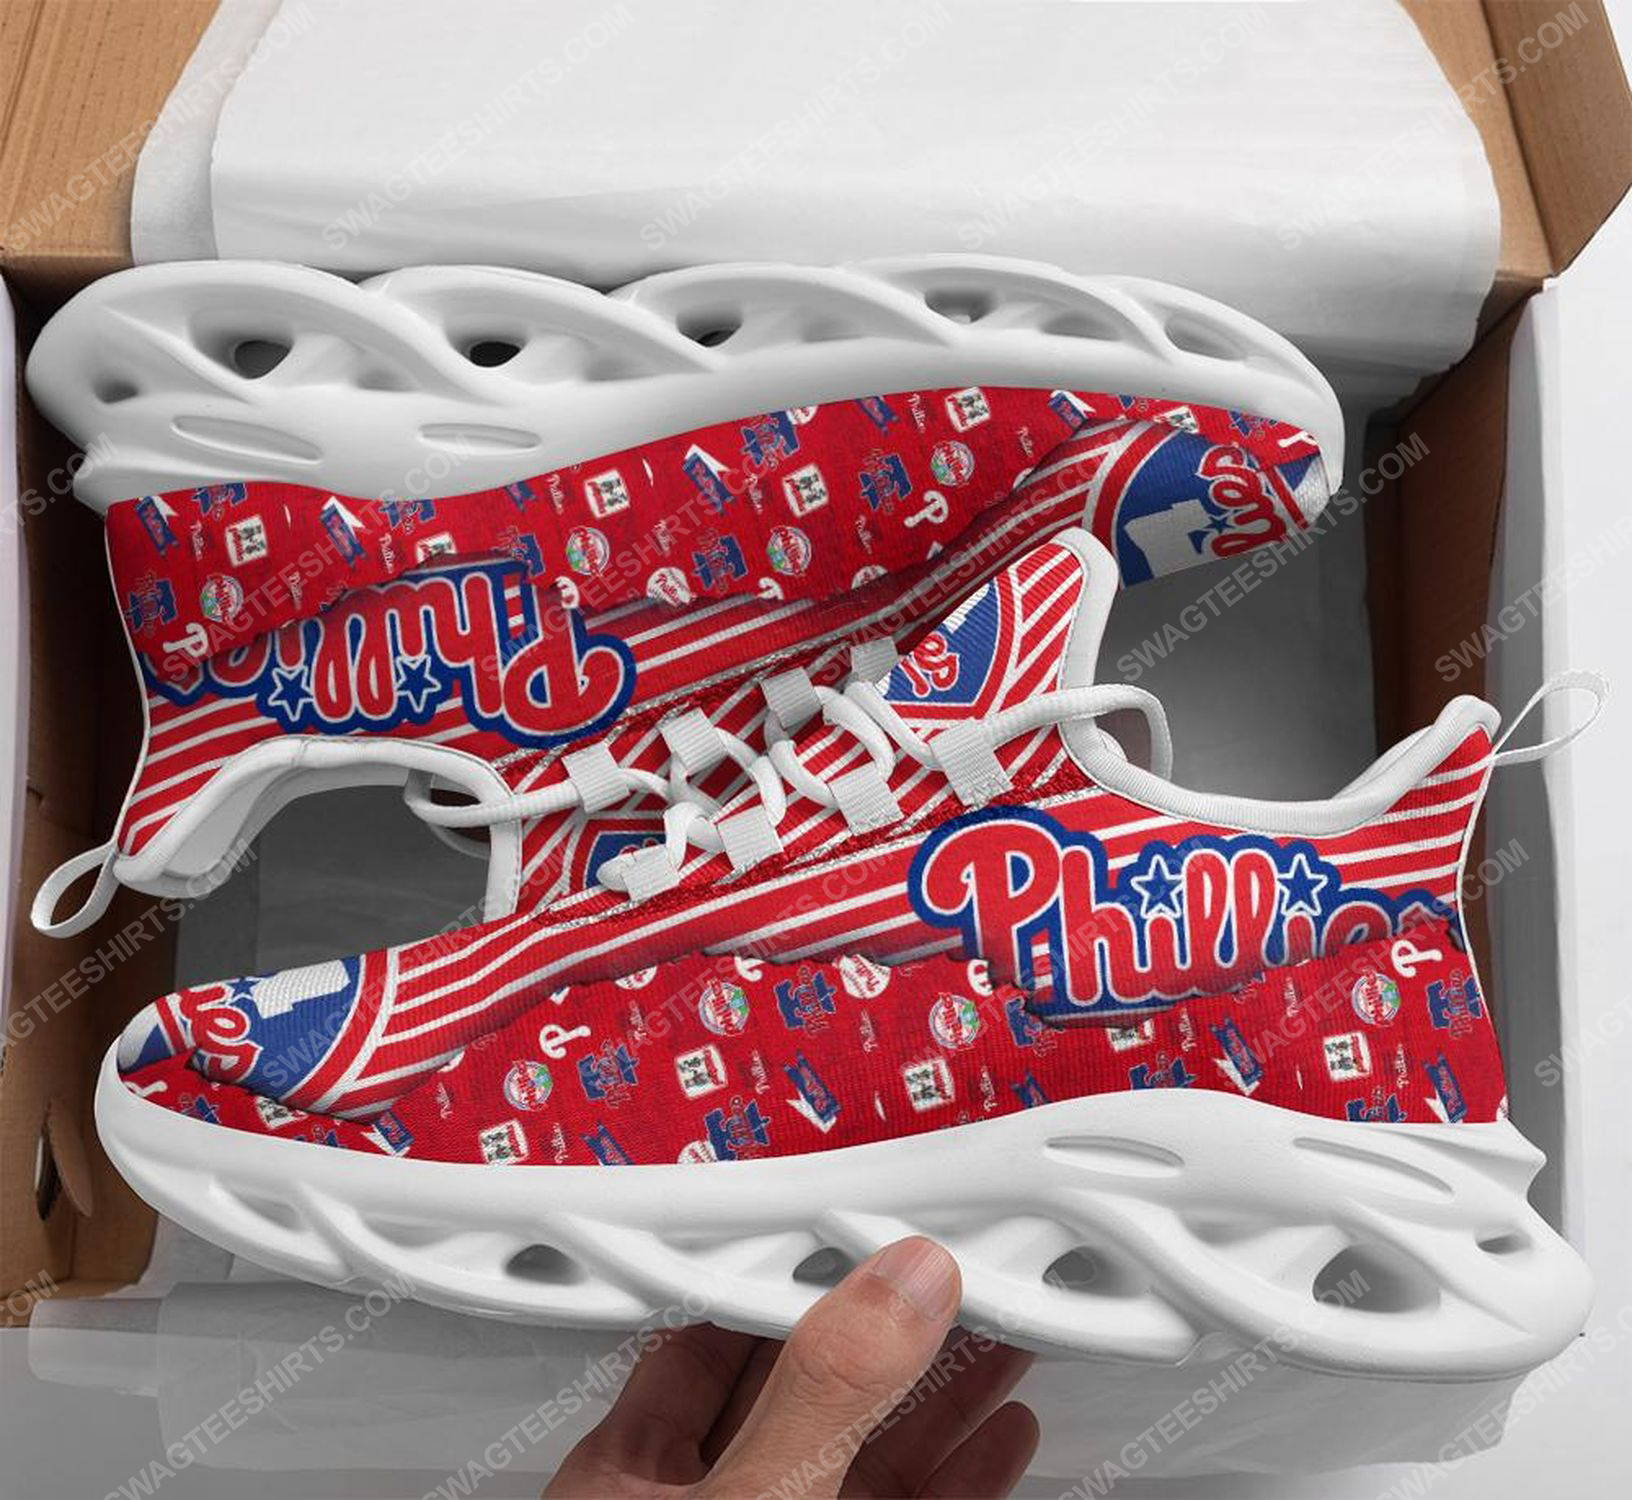 [special edition] The philadelphia phillie baseball team max soul shoes – Maria